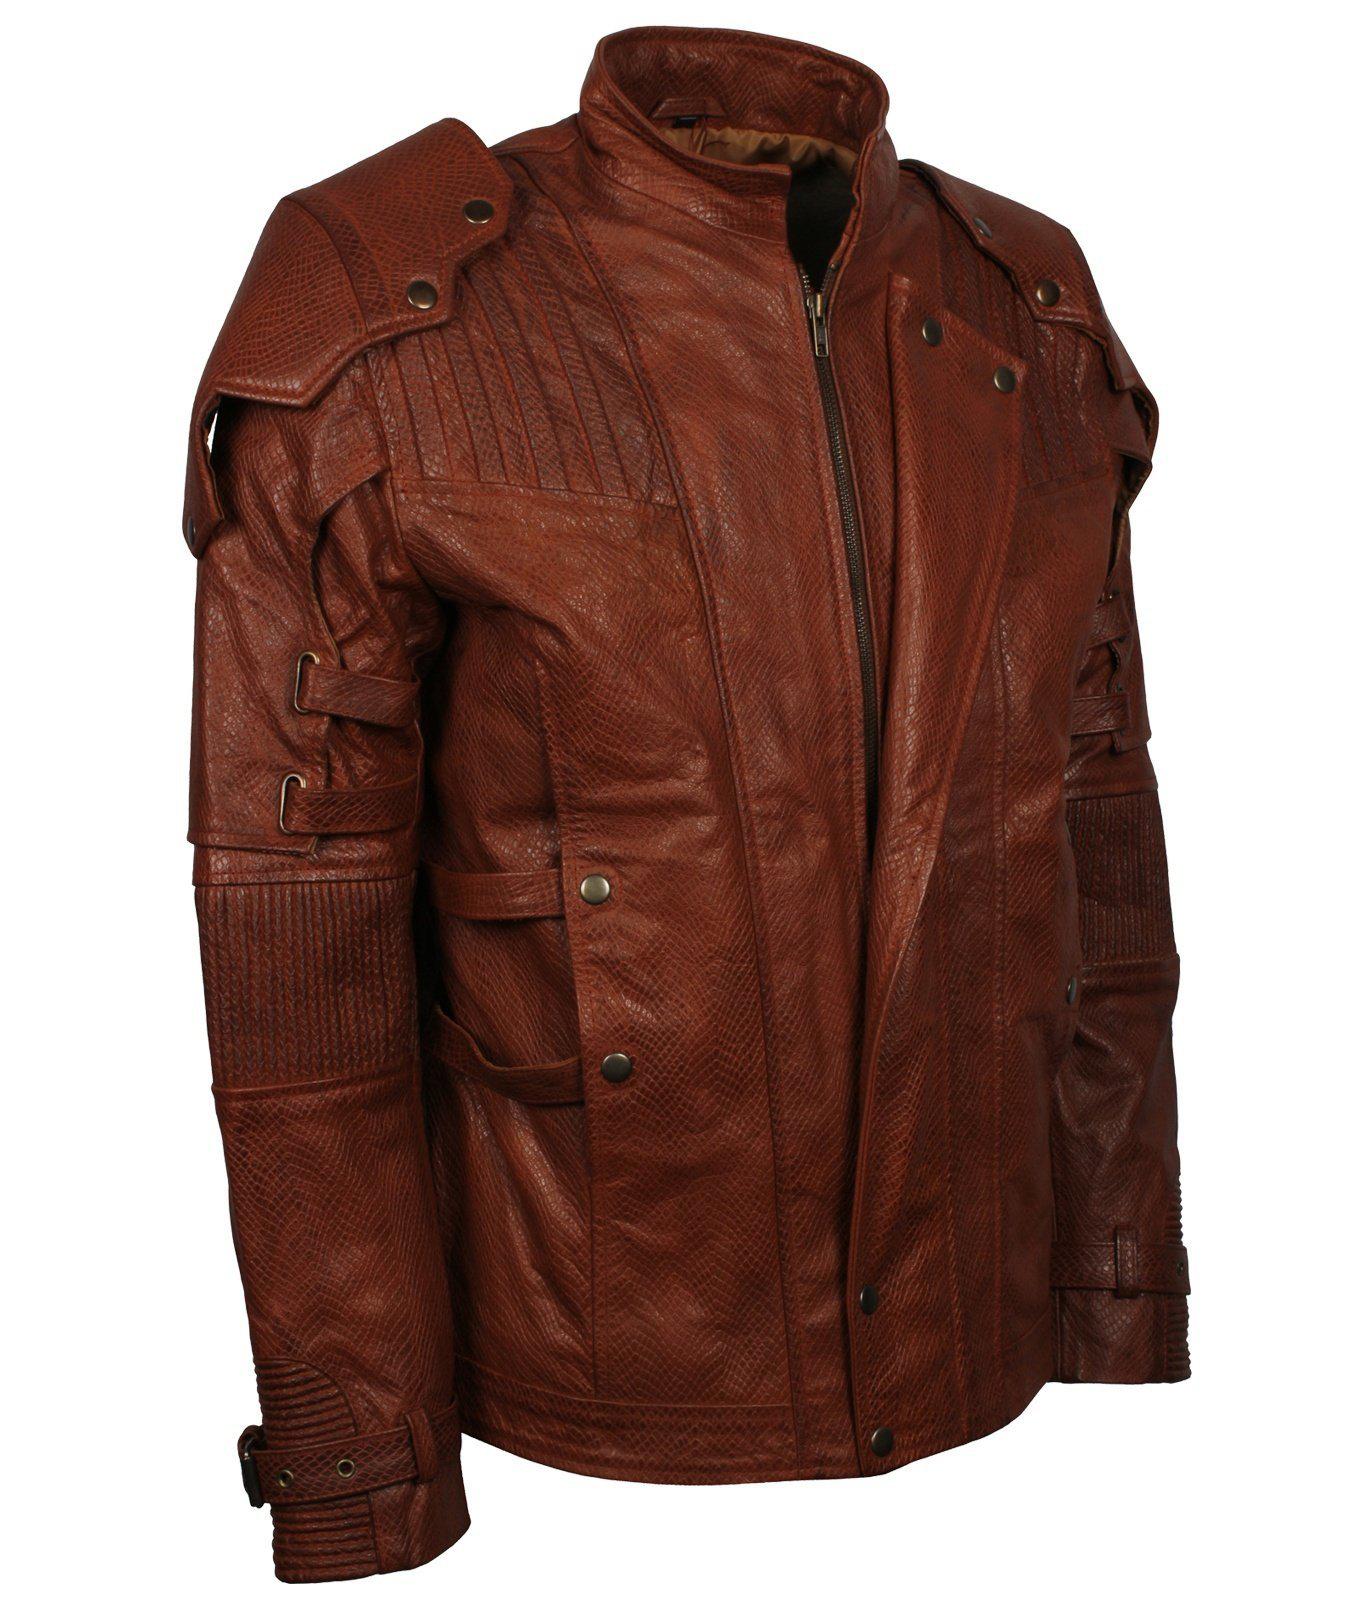 Guardians of The Galaxy Leather Jacket